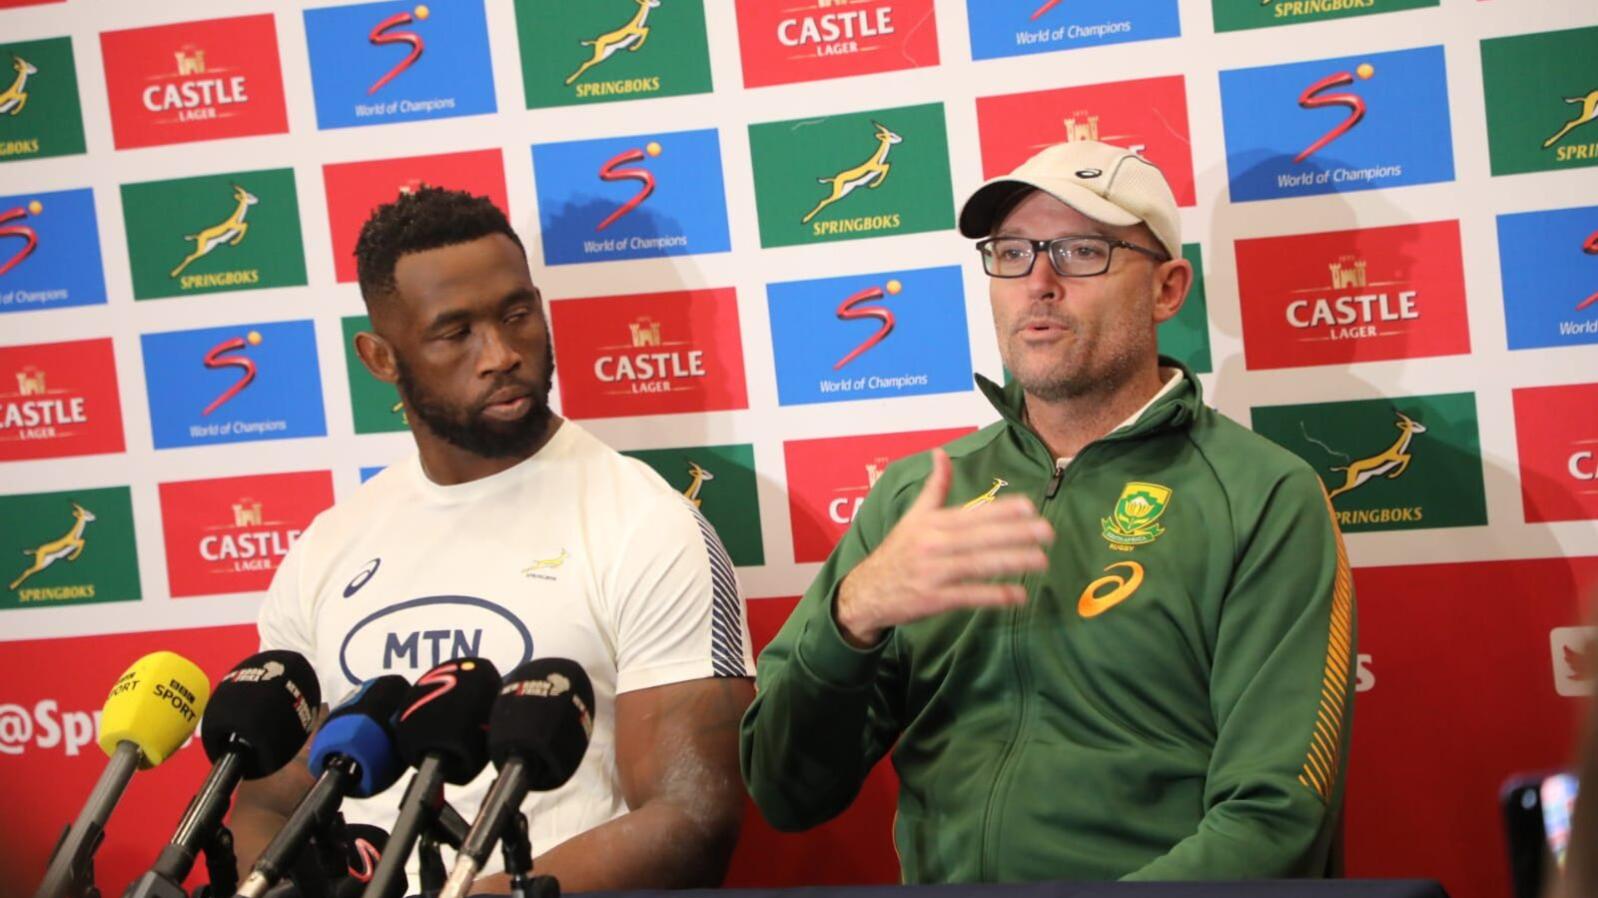 Springbok coach Jacques Nienaber and captain Siya Kolisi speak to the press after their Test match against Wales at Loftus Versfeld in Tshwane on Saturday